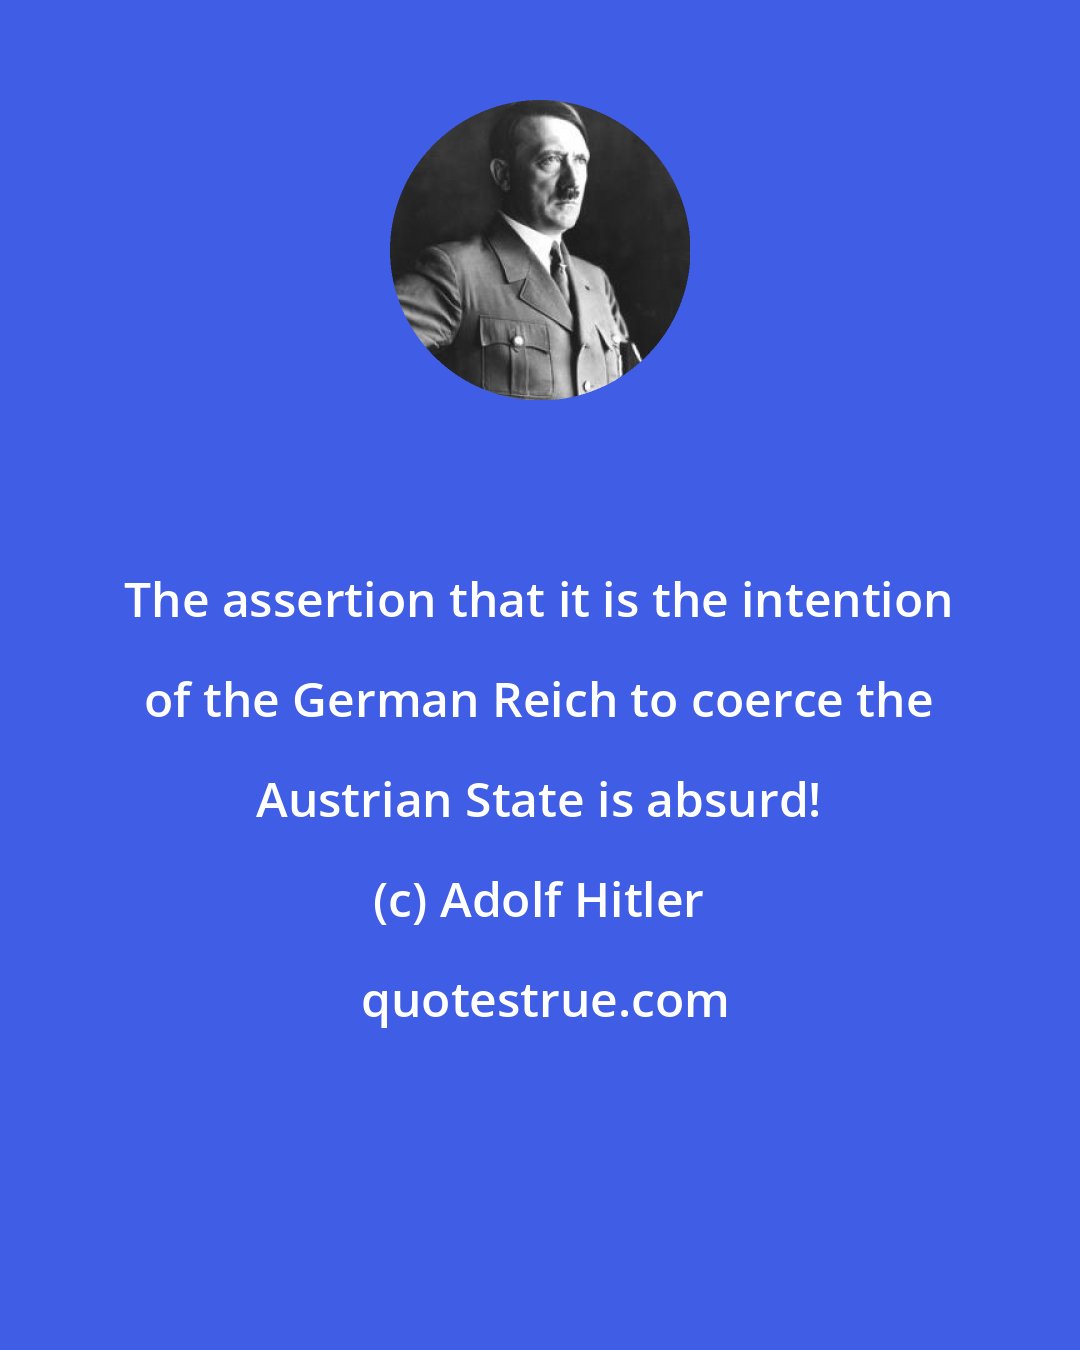 Adolf Hitler: The assertion that it is the intention of the German Reich to coerce the Austrian State is absurd!